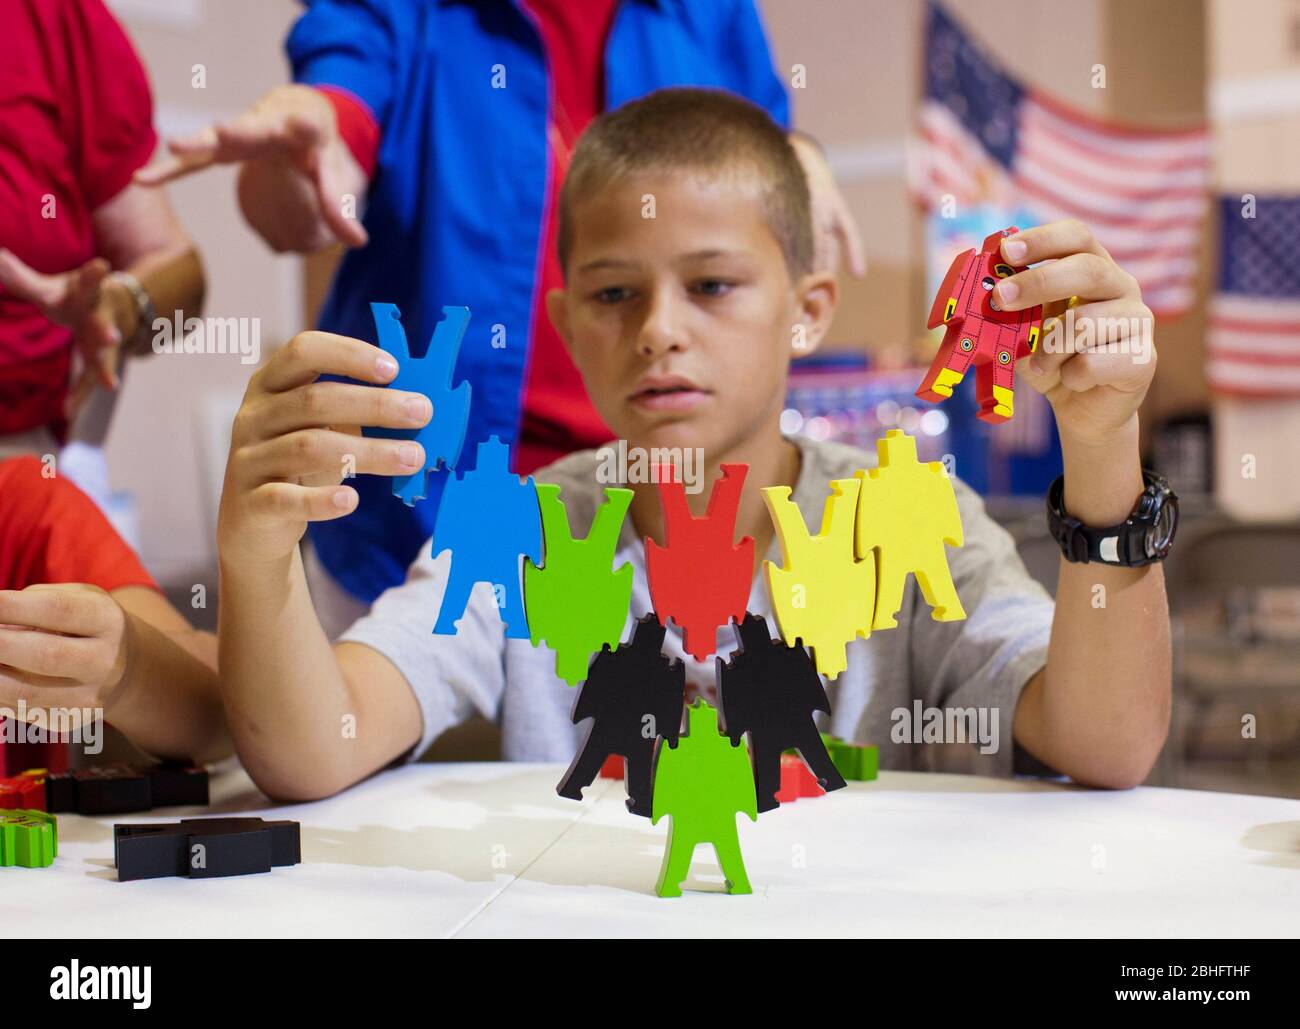 Georgetown Texas USA, August 17 2012: A student builds a toy structure that purports to show the 'instability of a government built around one person' during a week-long 'Vacation Liberty School' that teaches children ages 7-12 'the benefits of liberty from the perspective of faith, hope and charity.' ©Bob Daemmrich Stock Photo